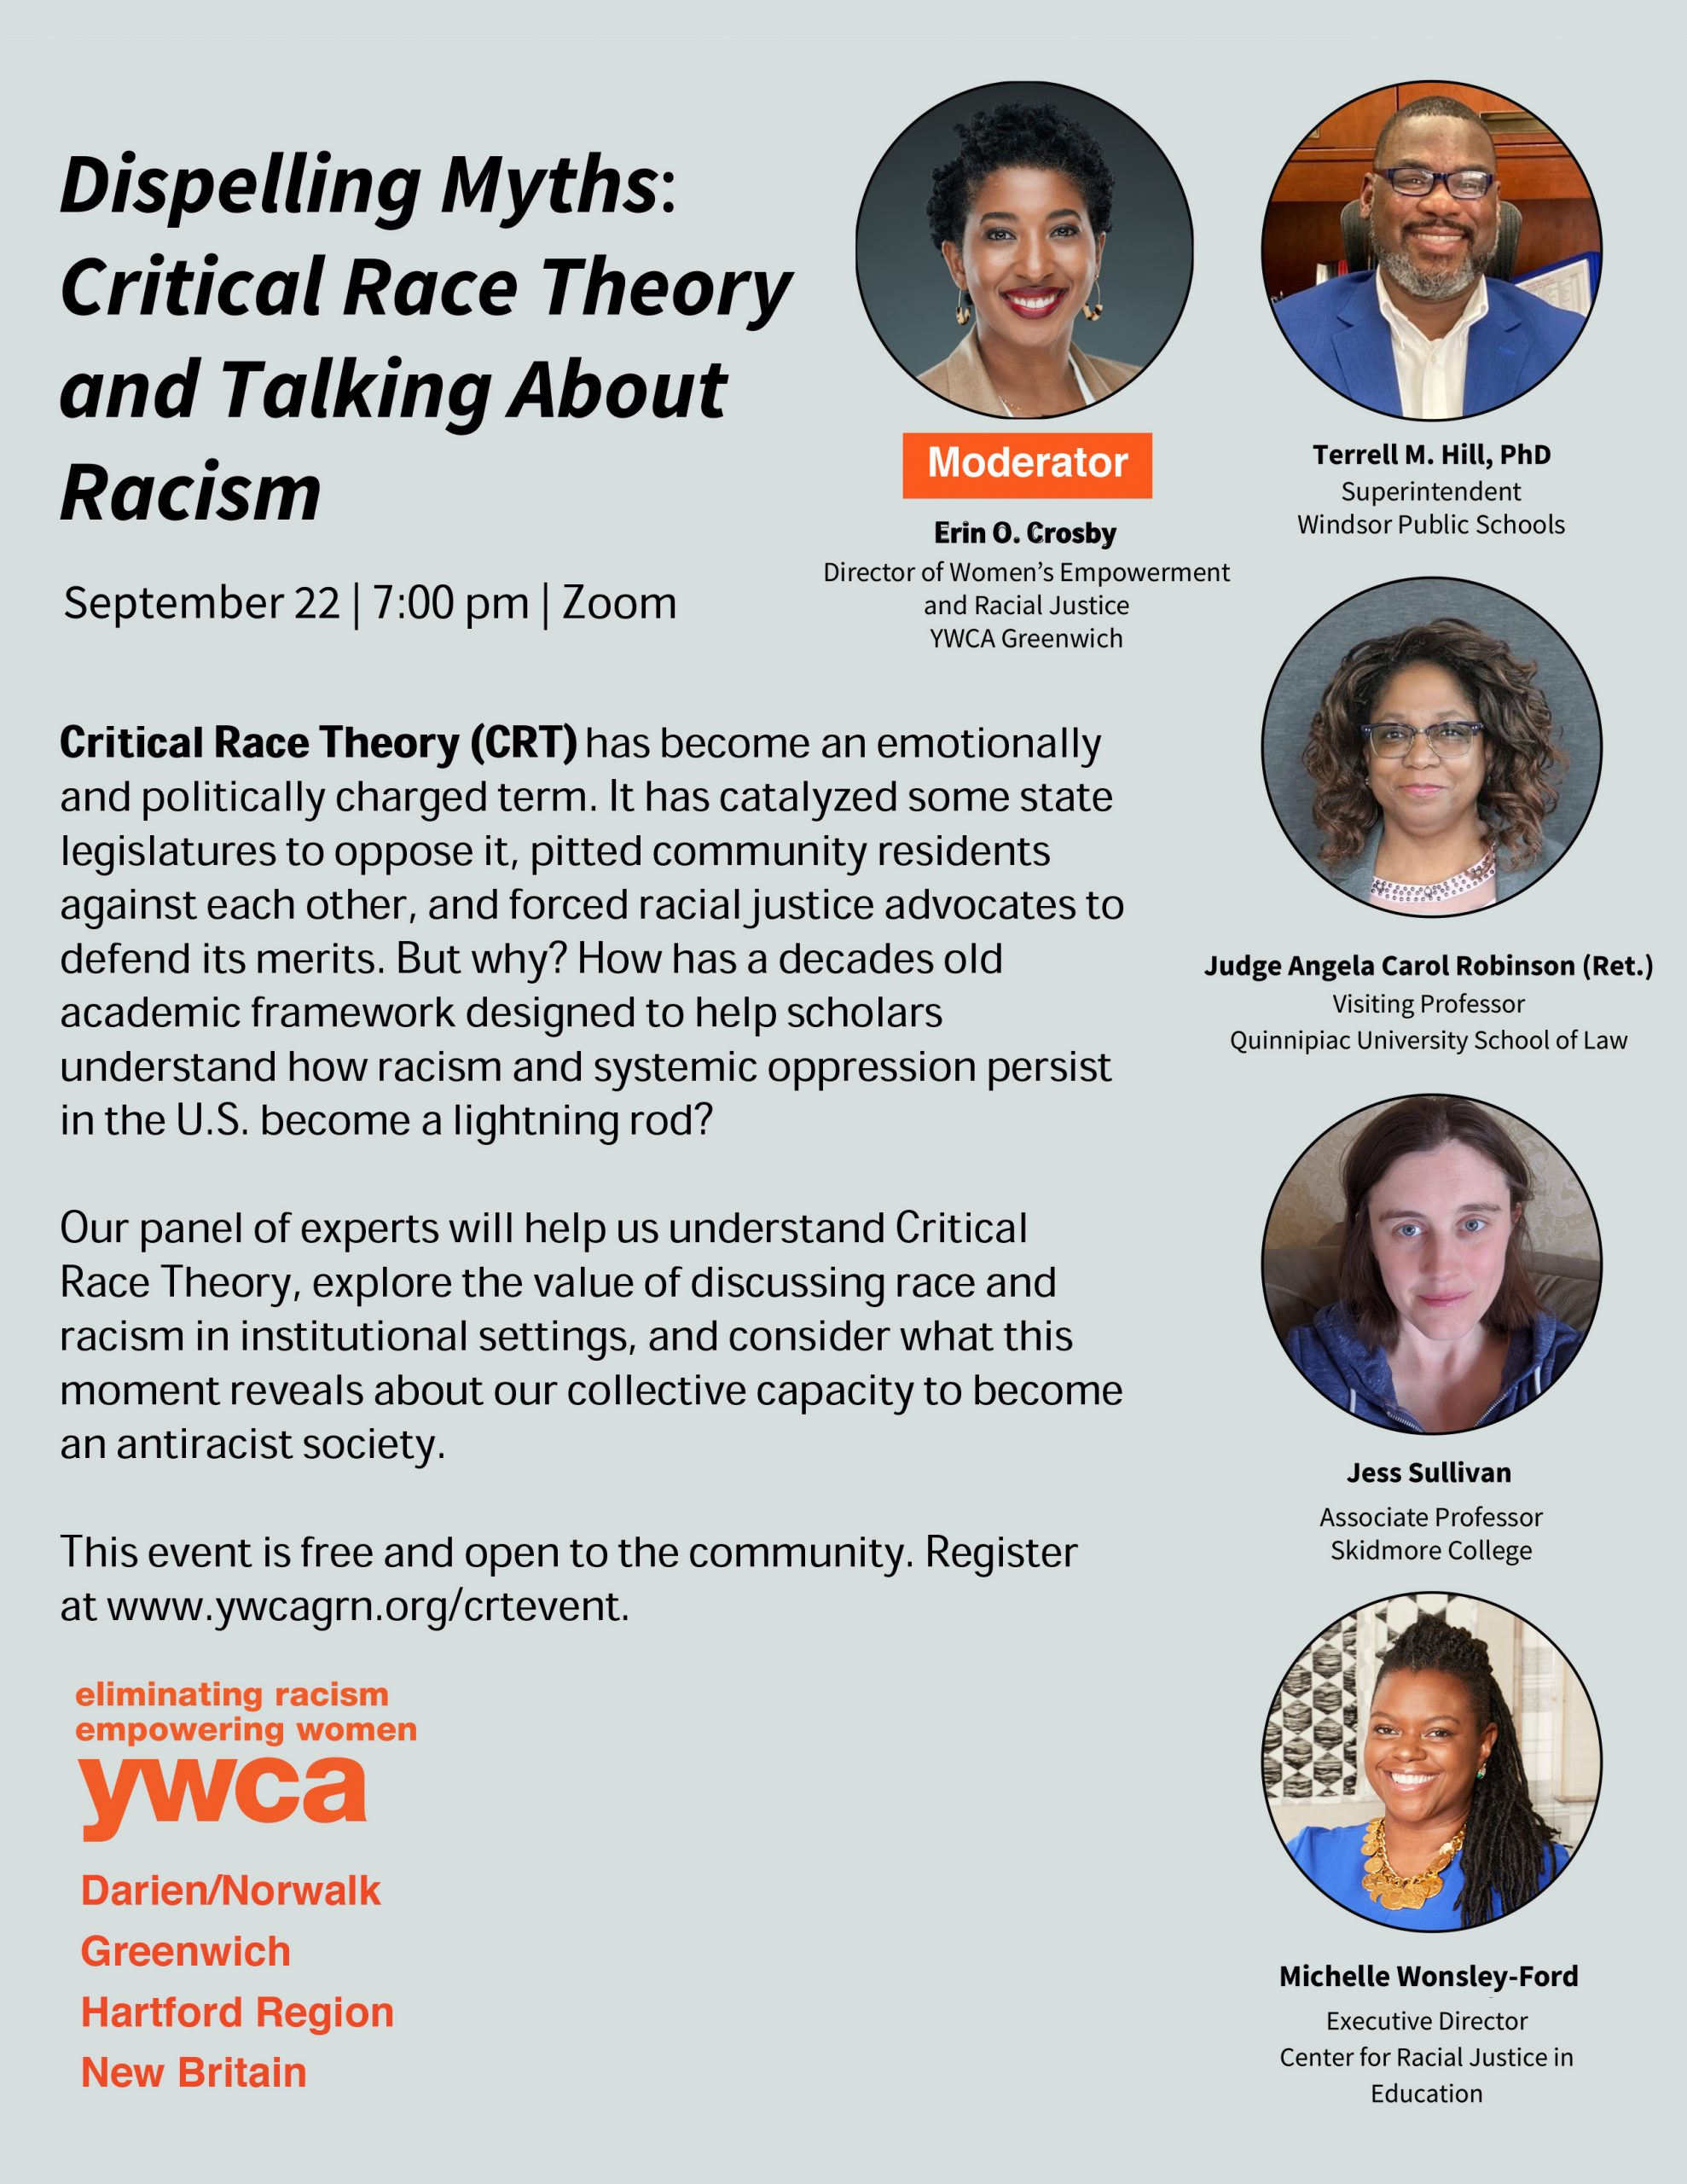 Dispelling Myths: Critical Race Theory and Talking About Racism